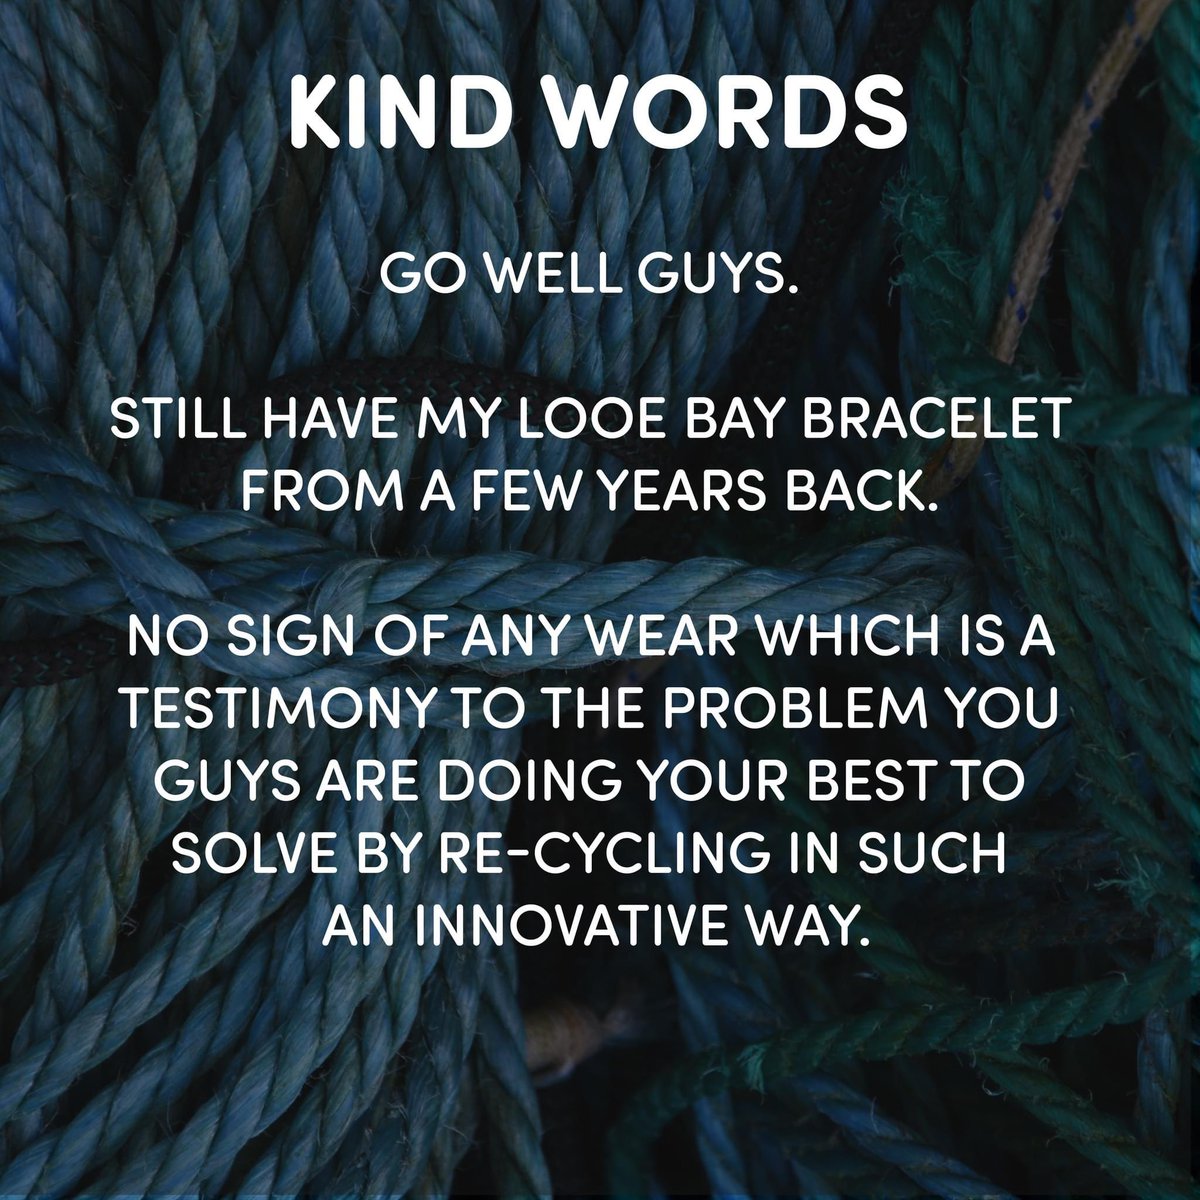 Kind Words
💙
'Go well guys. Still have my Looe Bay bracelet from a few years back. No sign of any wear which is a testimony to the problem you guys are doing your best to solve by re-cycling in such an innovative way.'

#ecogift #ecopresent #sustainablepresents #sustainablegift